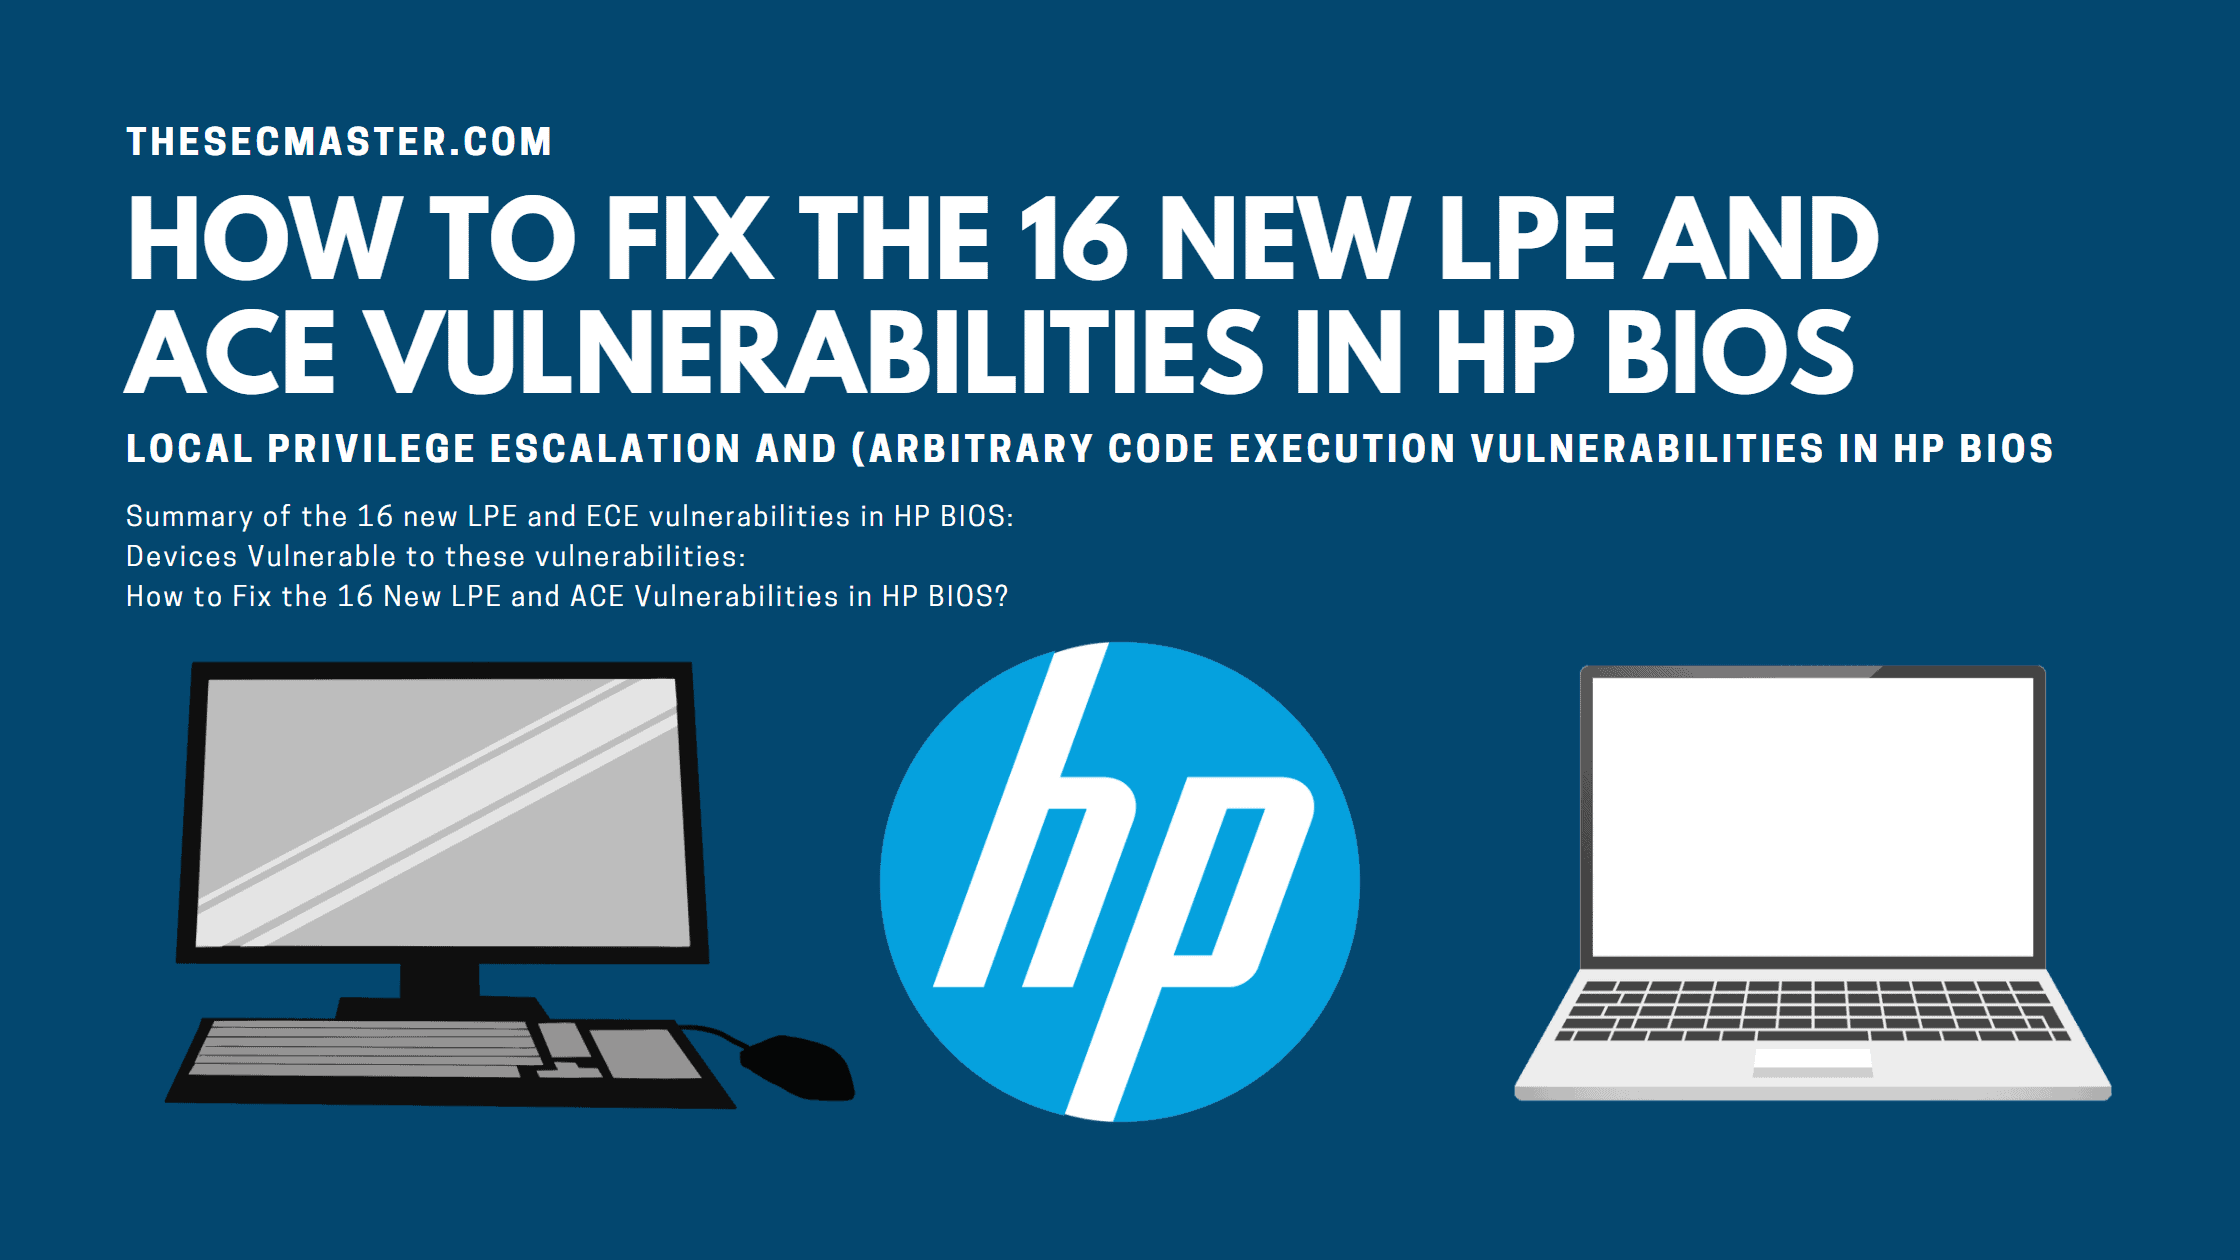 How To Fix The 16 New Lpe And Ace Vulnerabilities In Hp Bios